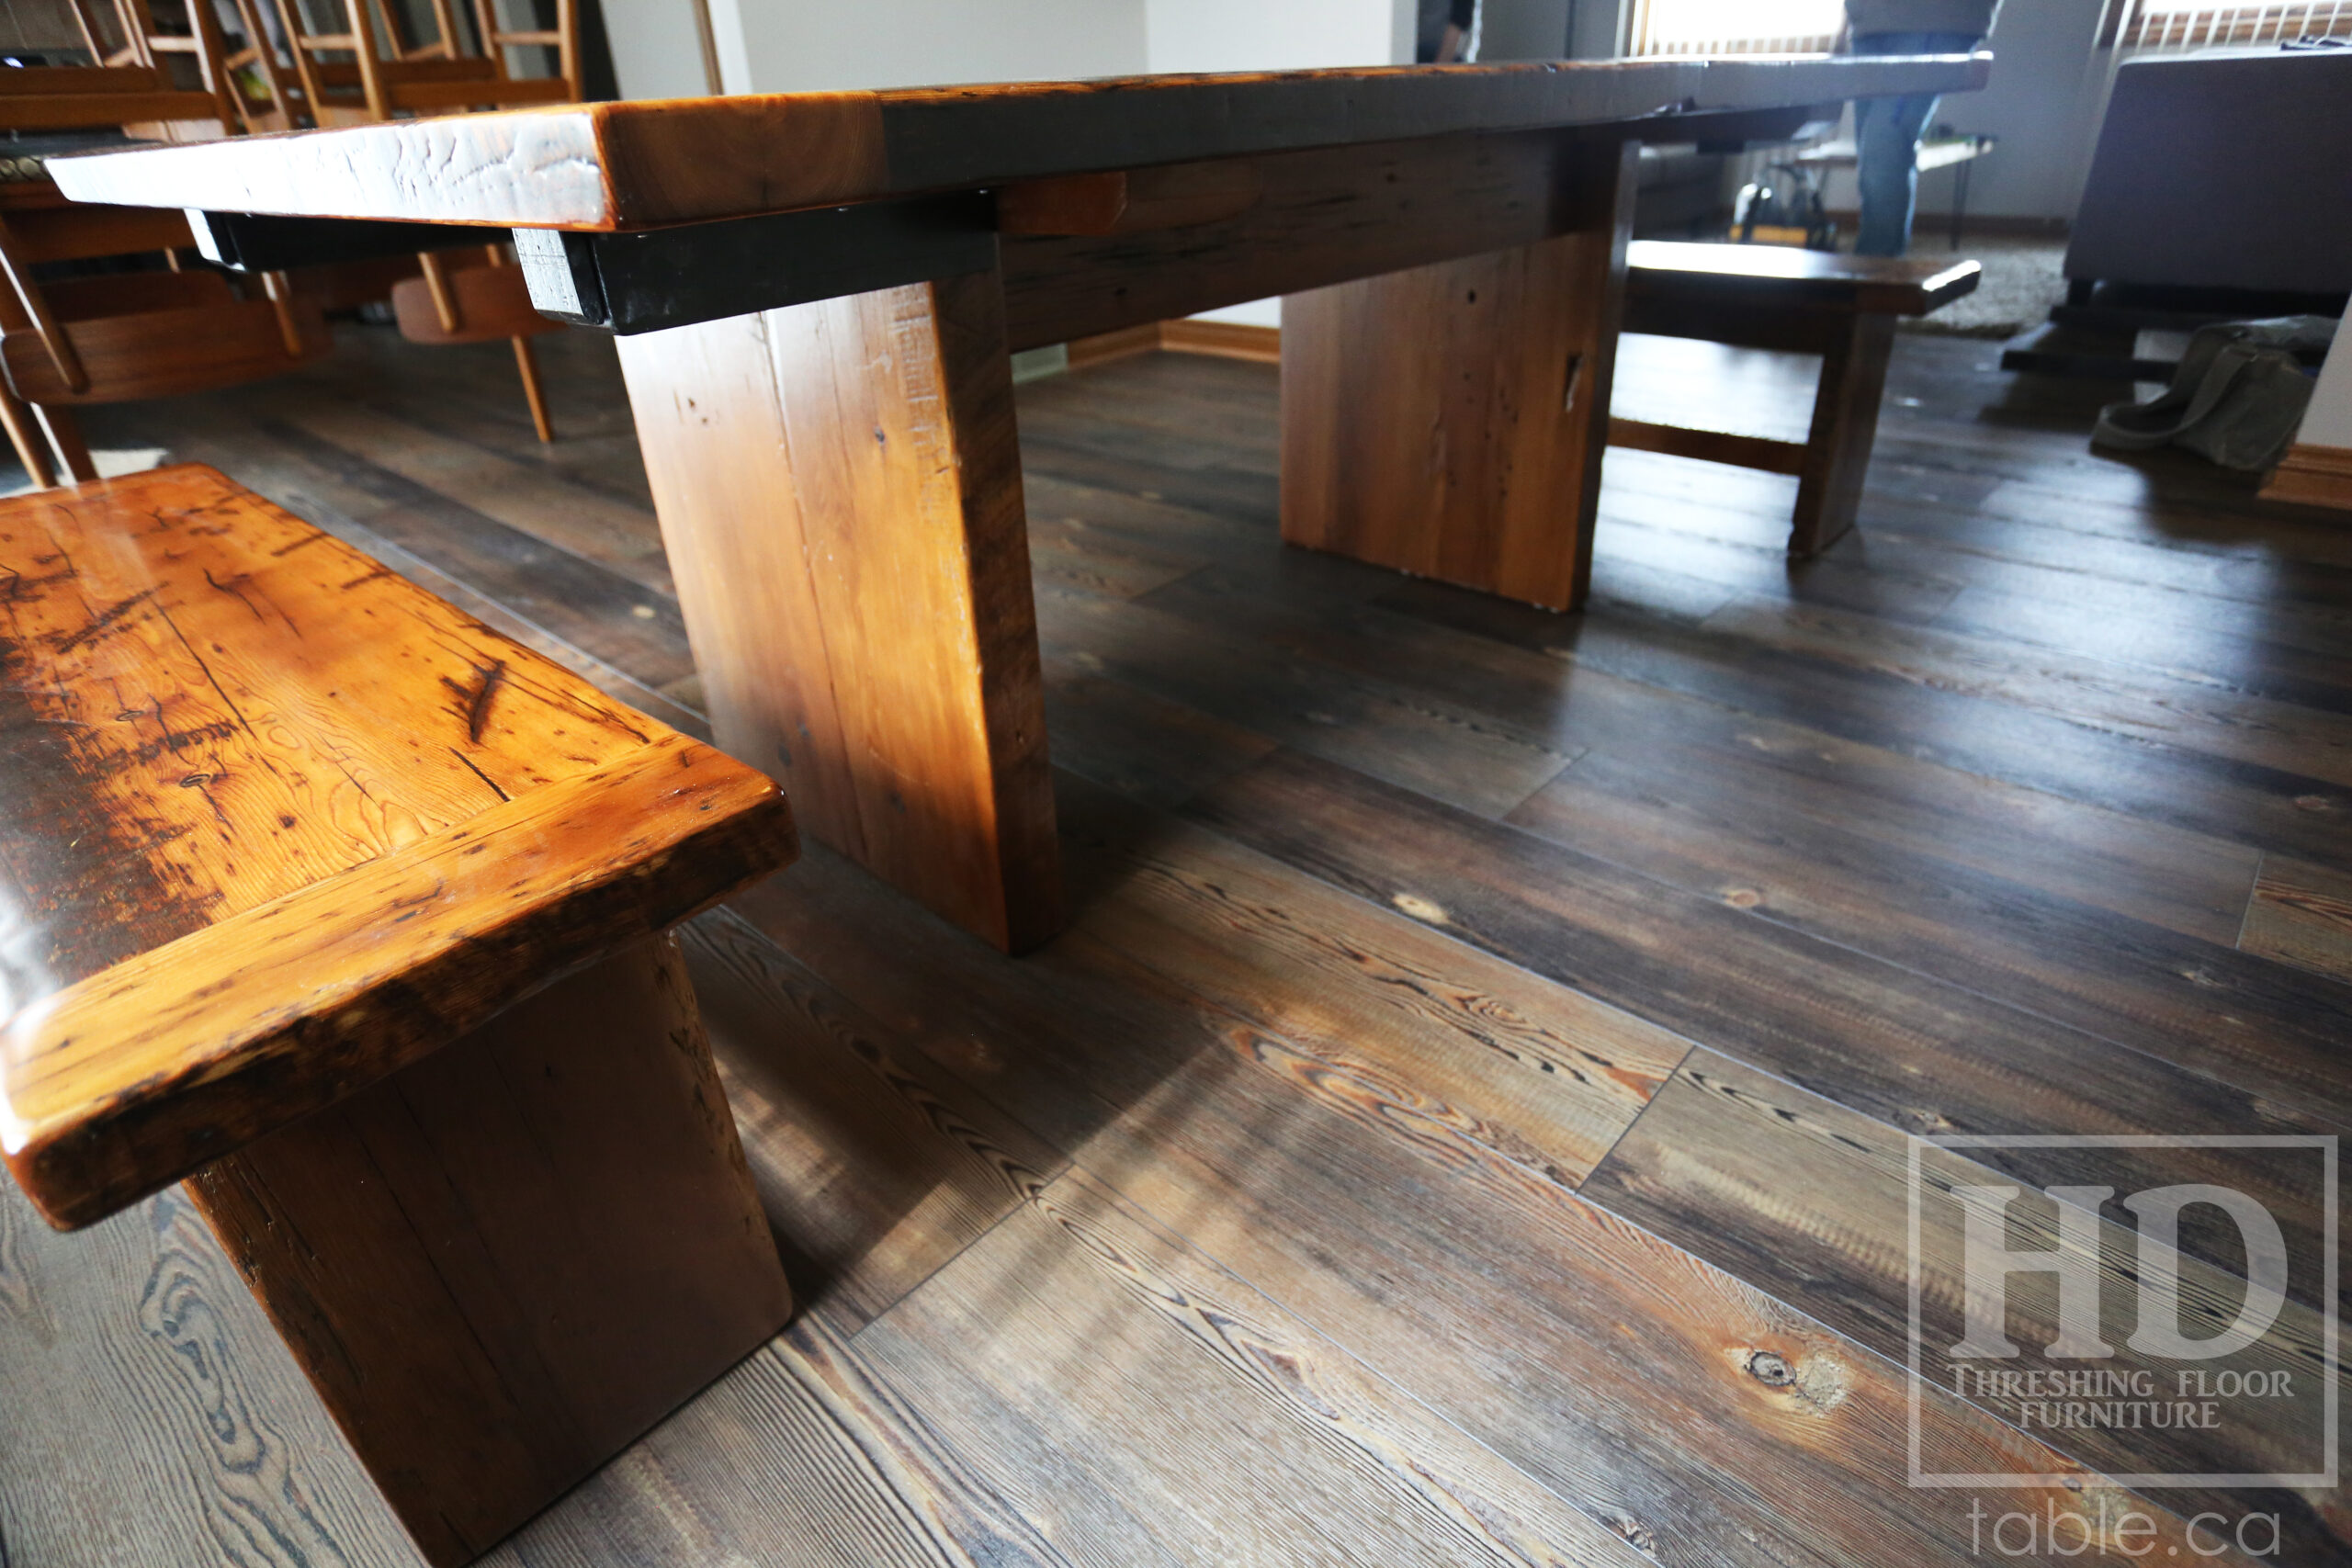 6.5’ Reclaimed Ontario Barnwood Table we made for a Niagara Falls, Ontario home – 48” wide – Modern Plank Base - Old Growth Hemlock Threshing Floor Construction - Original edges & distressing maintained – Bread Edge Ends - Premium epoxy + satin polyurethane finish – Two 18” Leaf Extensions – Two [matching] 48” benches - www.table.ca